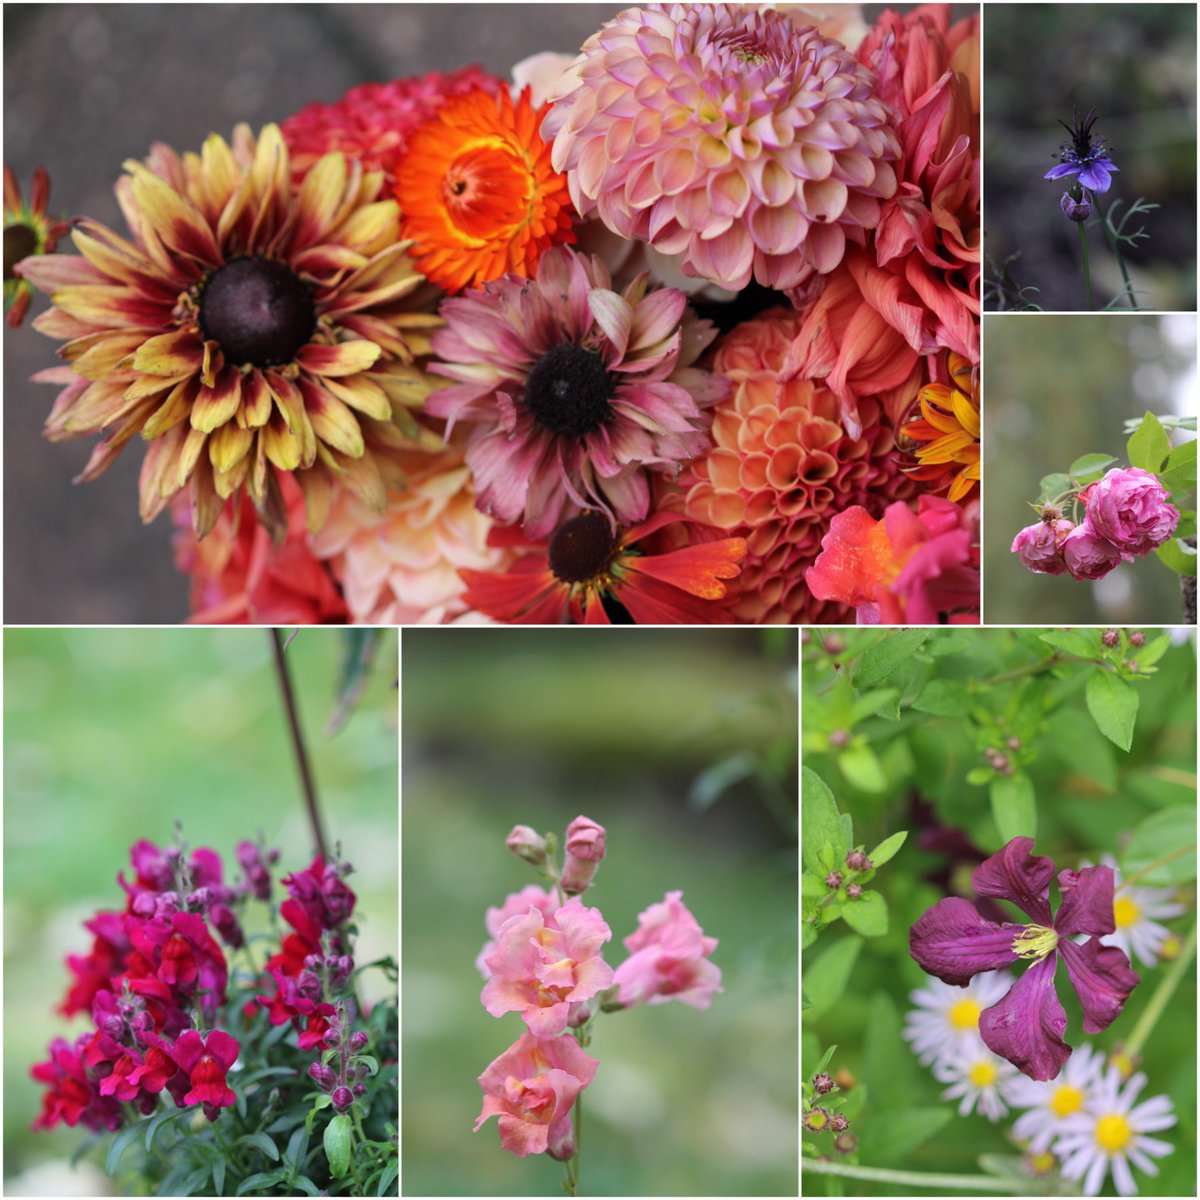 October in my #garden for this weeks #SixOnSaturday. Happy weekend to all!